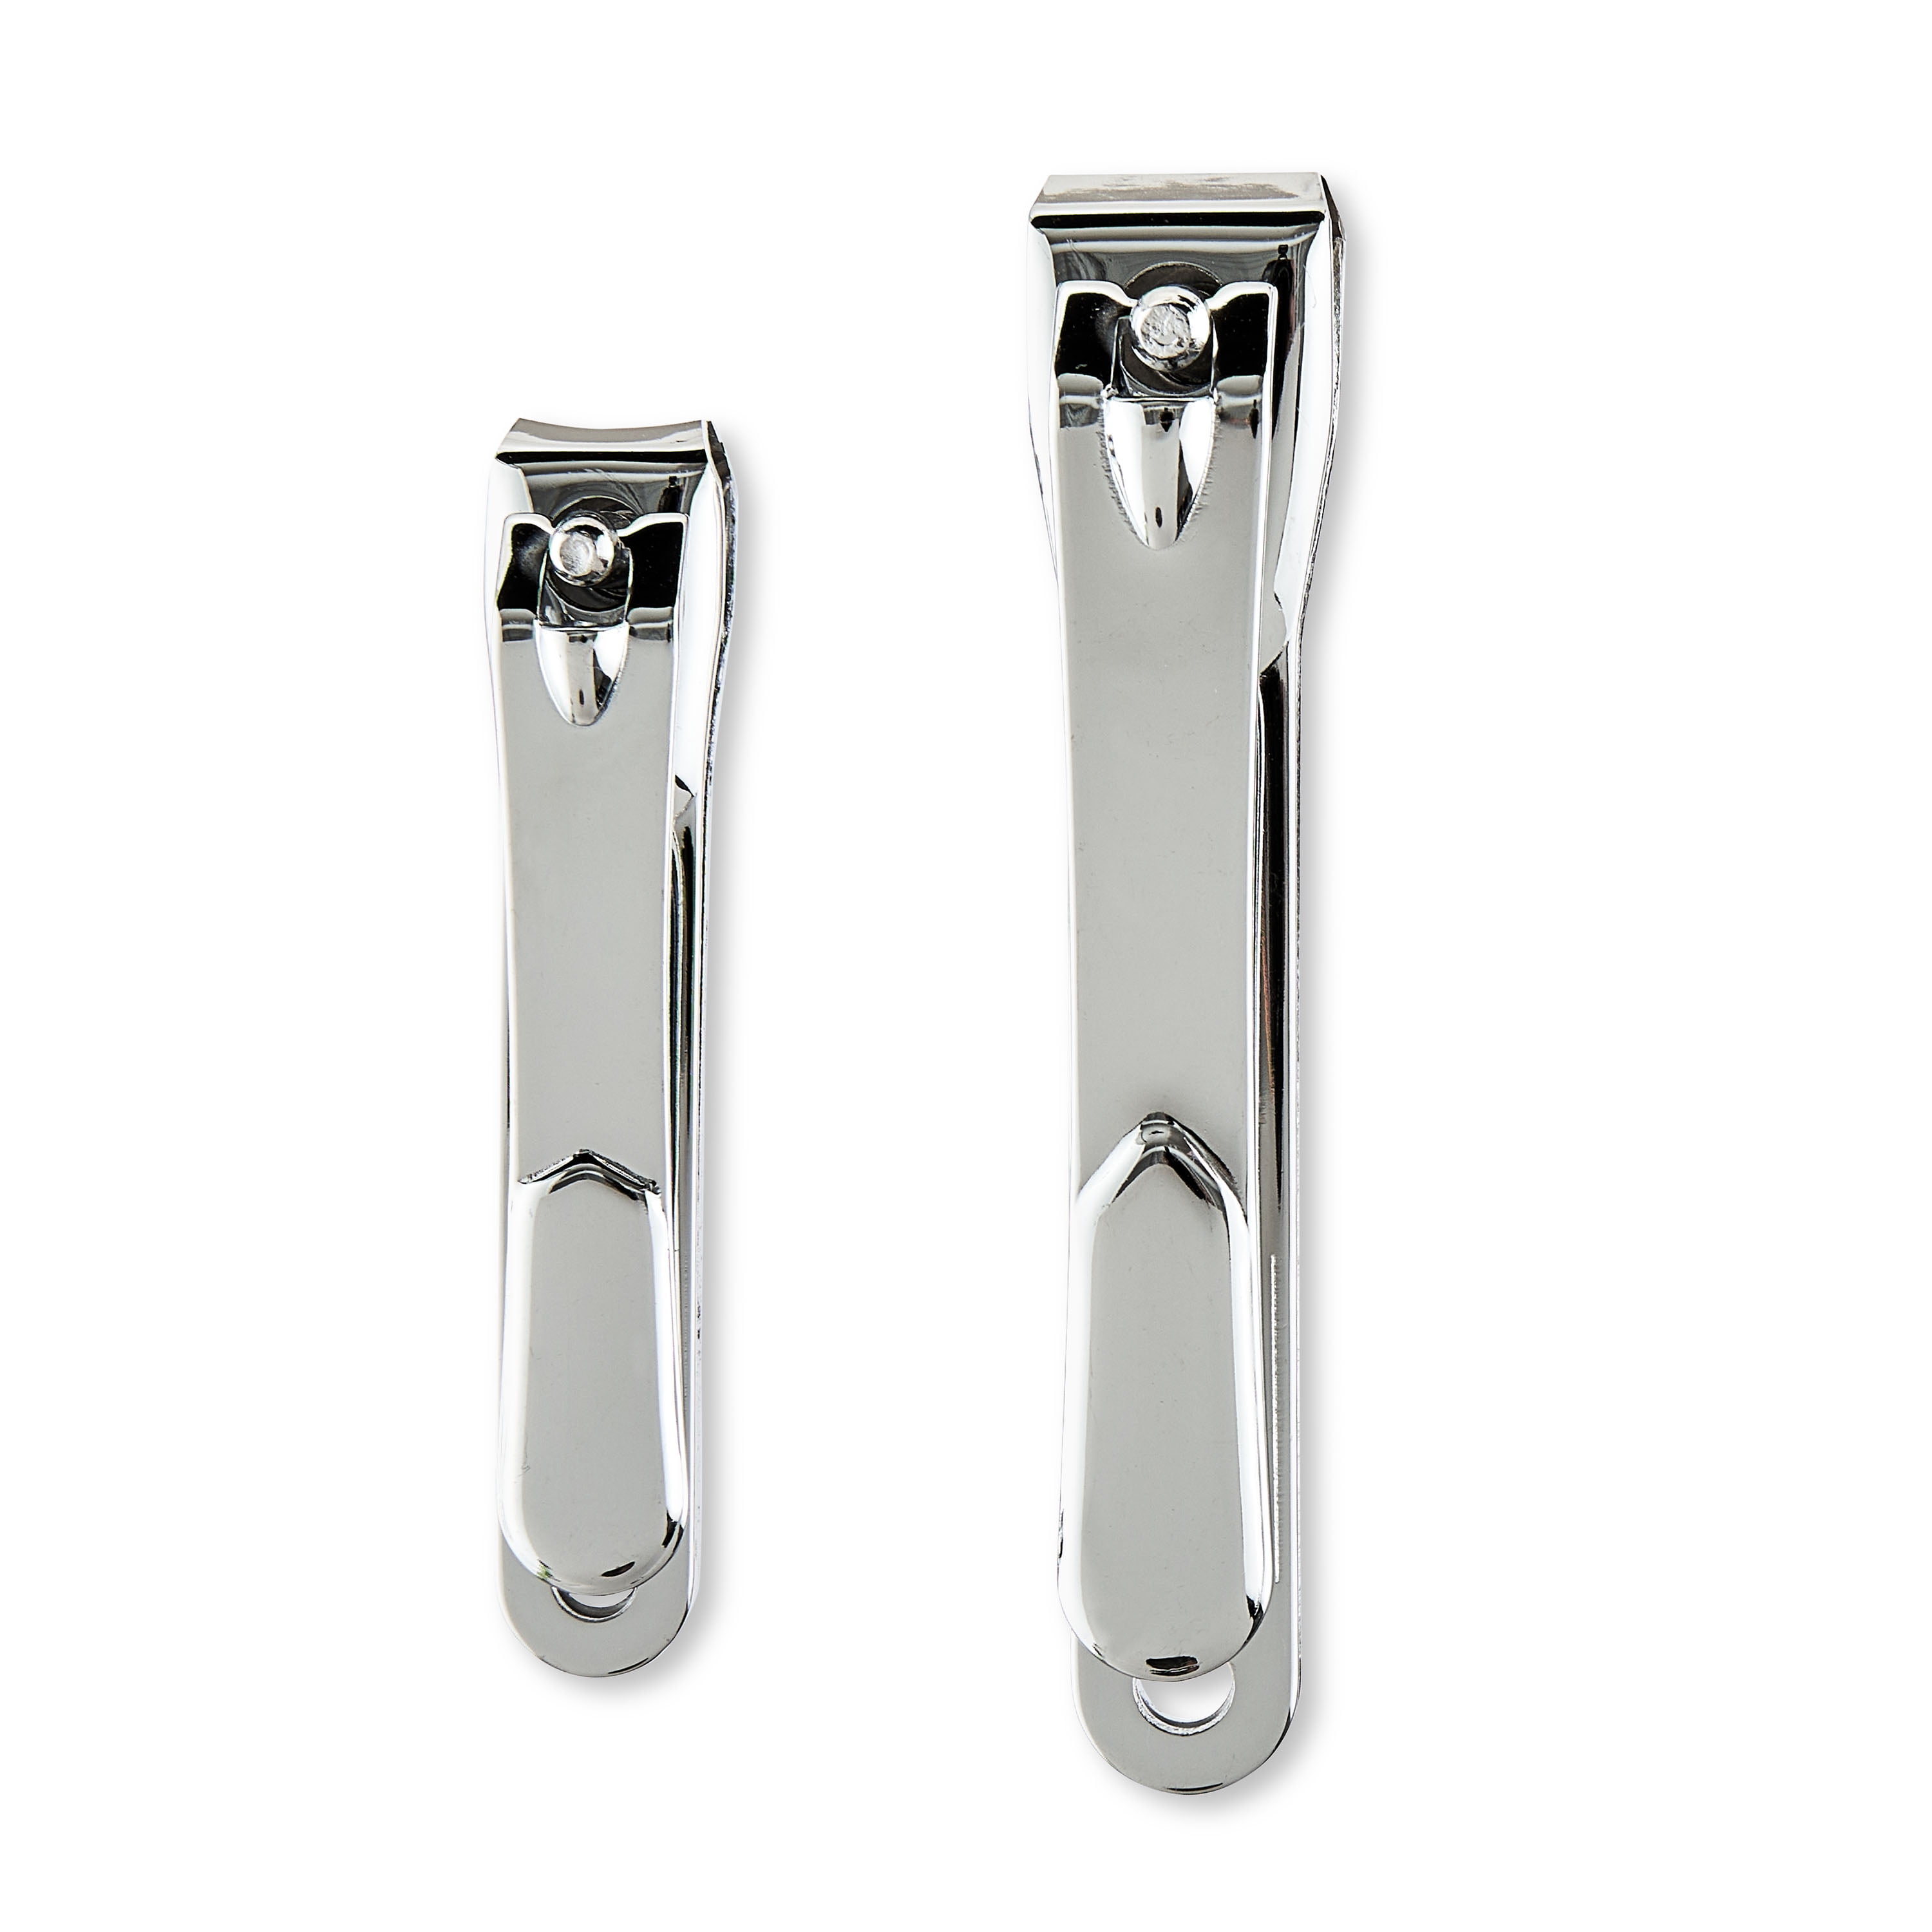 NAIL CLIPPERS (With catcher) – ACW